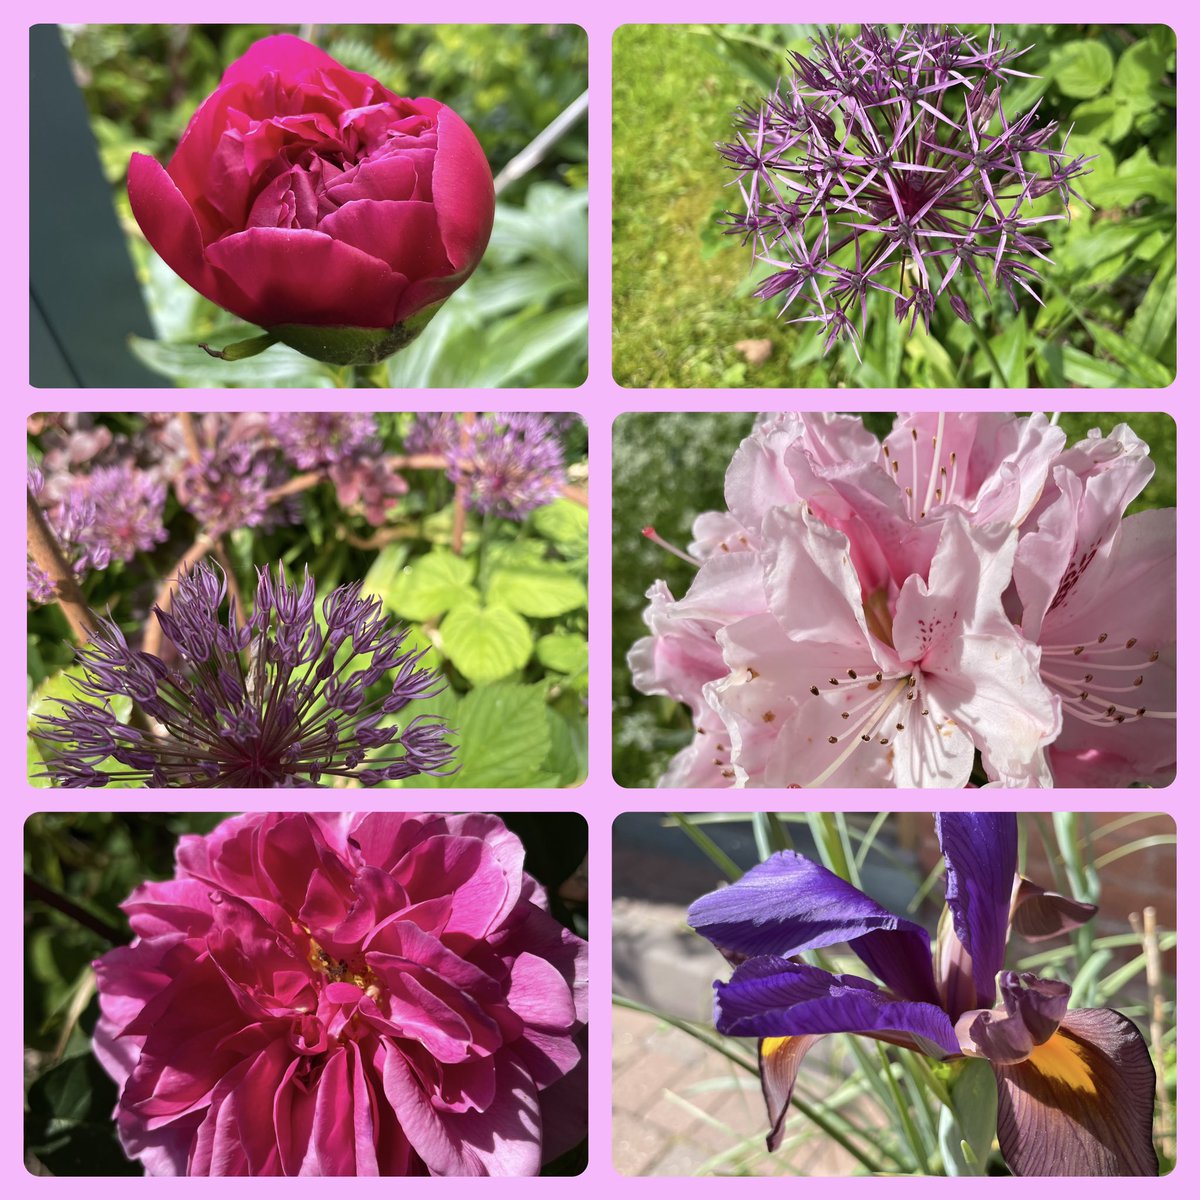 It’s gone full summer in the garden this week! So a May #SixOnSaturday has roses , peonies and alliums giving plenty of colour.